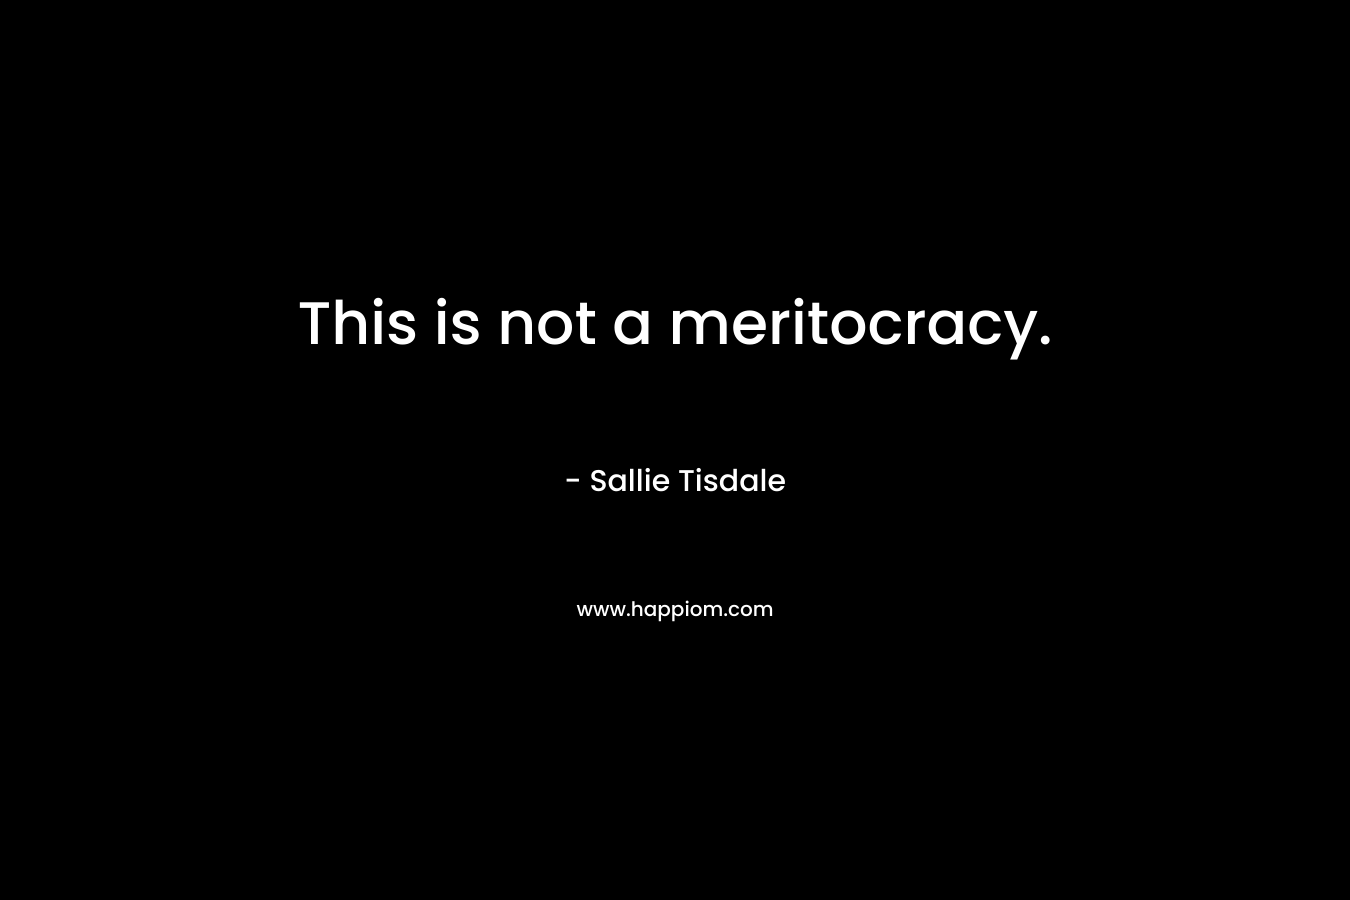 This is not a meritocracy.